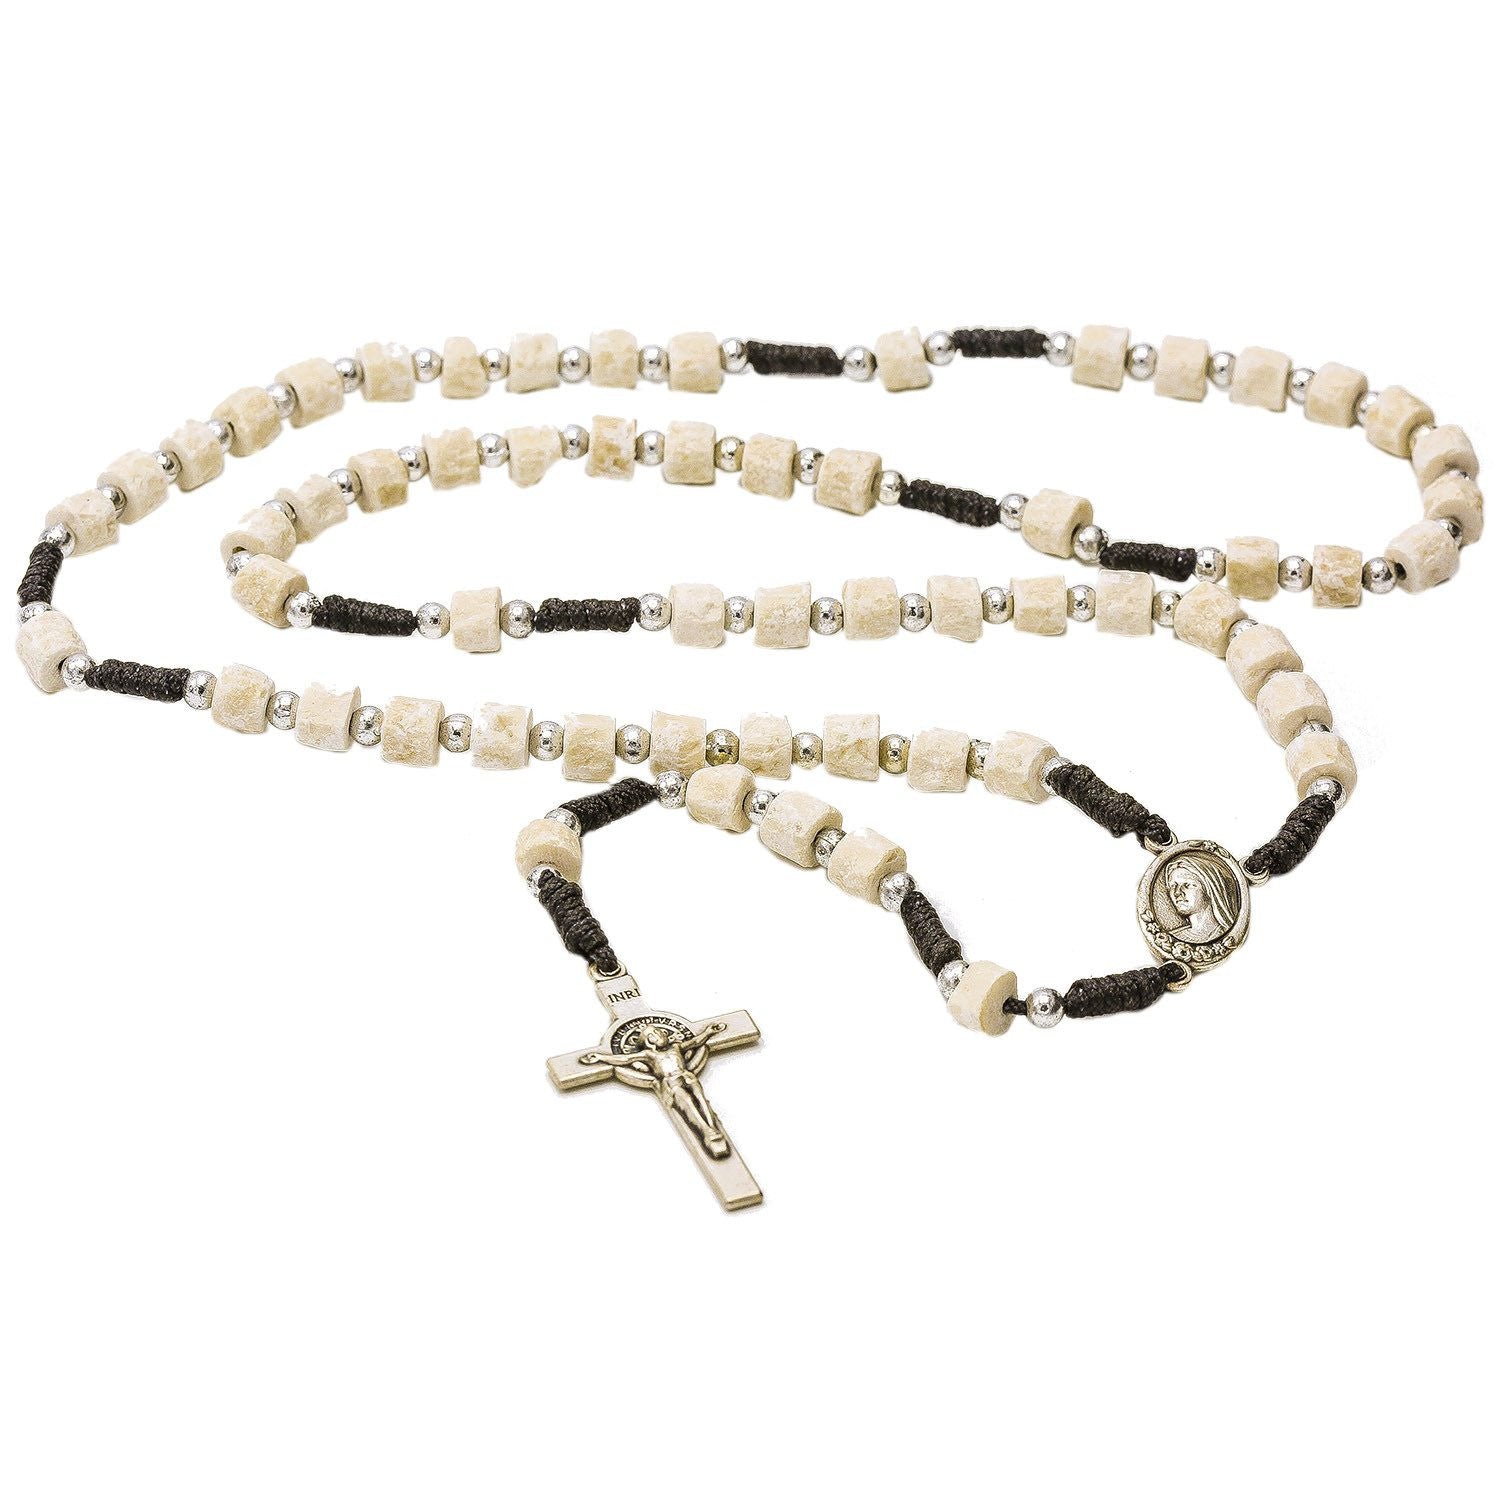 Medjugorje Brown Cord Rosary Our Lady of Medjugorje Medal and St Benedict Crucifix